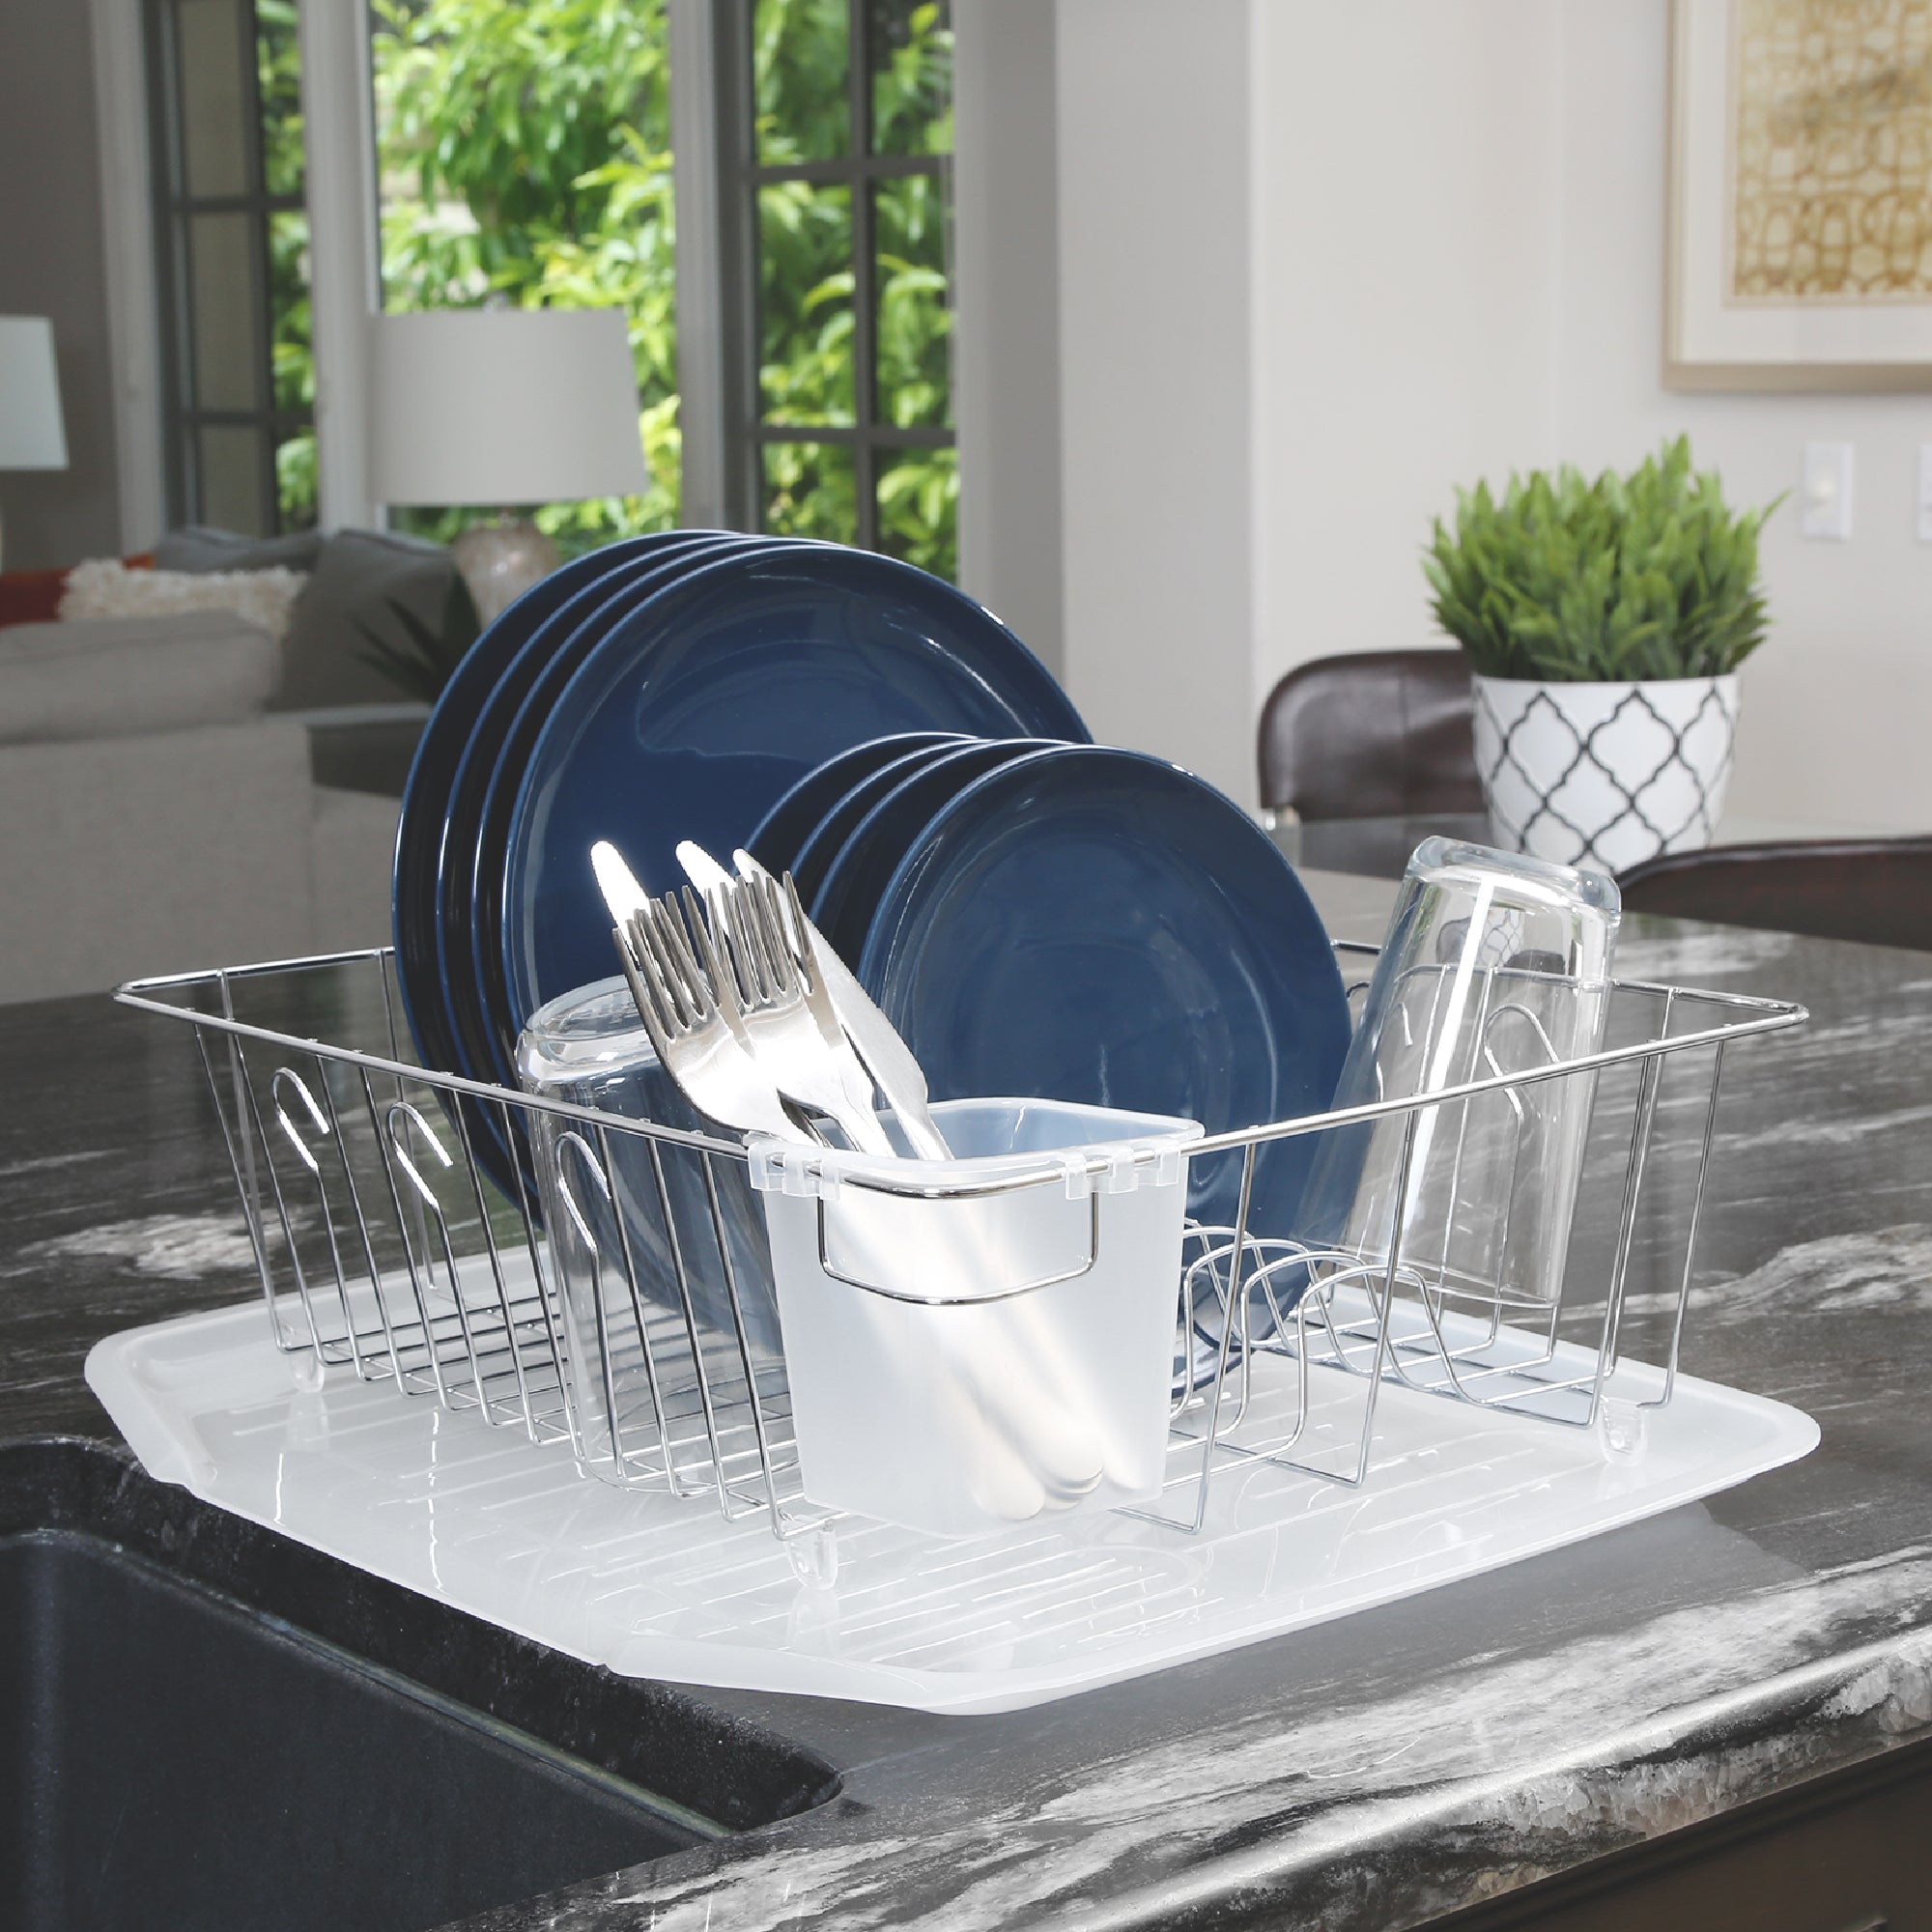 Kitchen Details Large Dish Rack with Tray in Silver